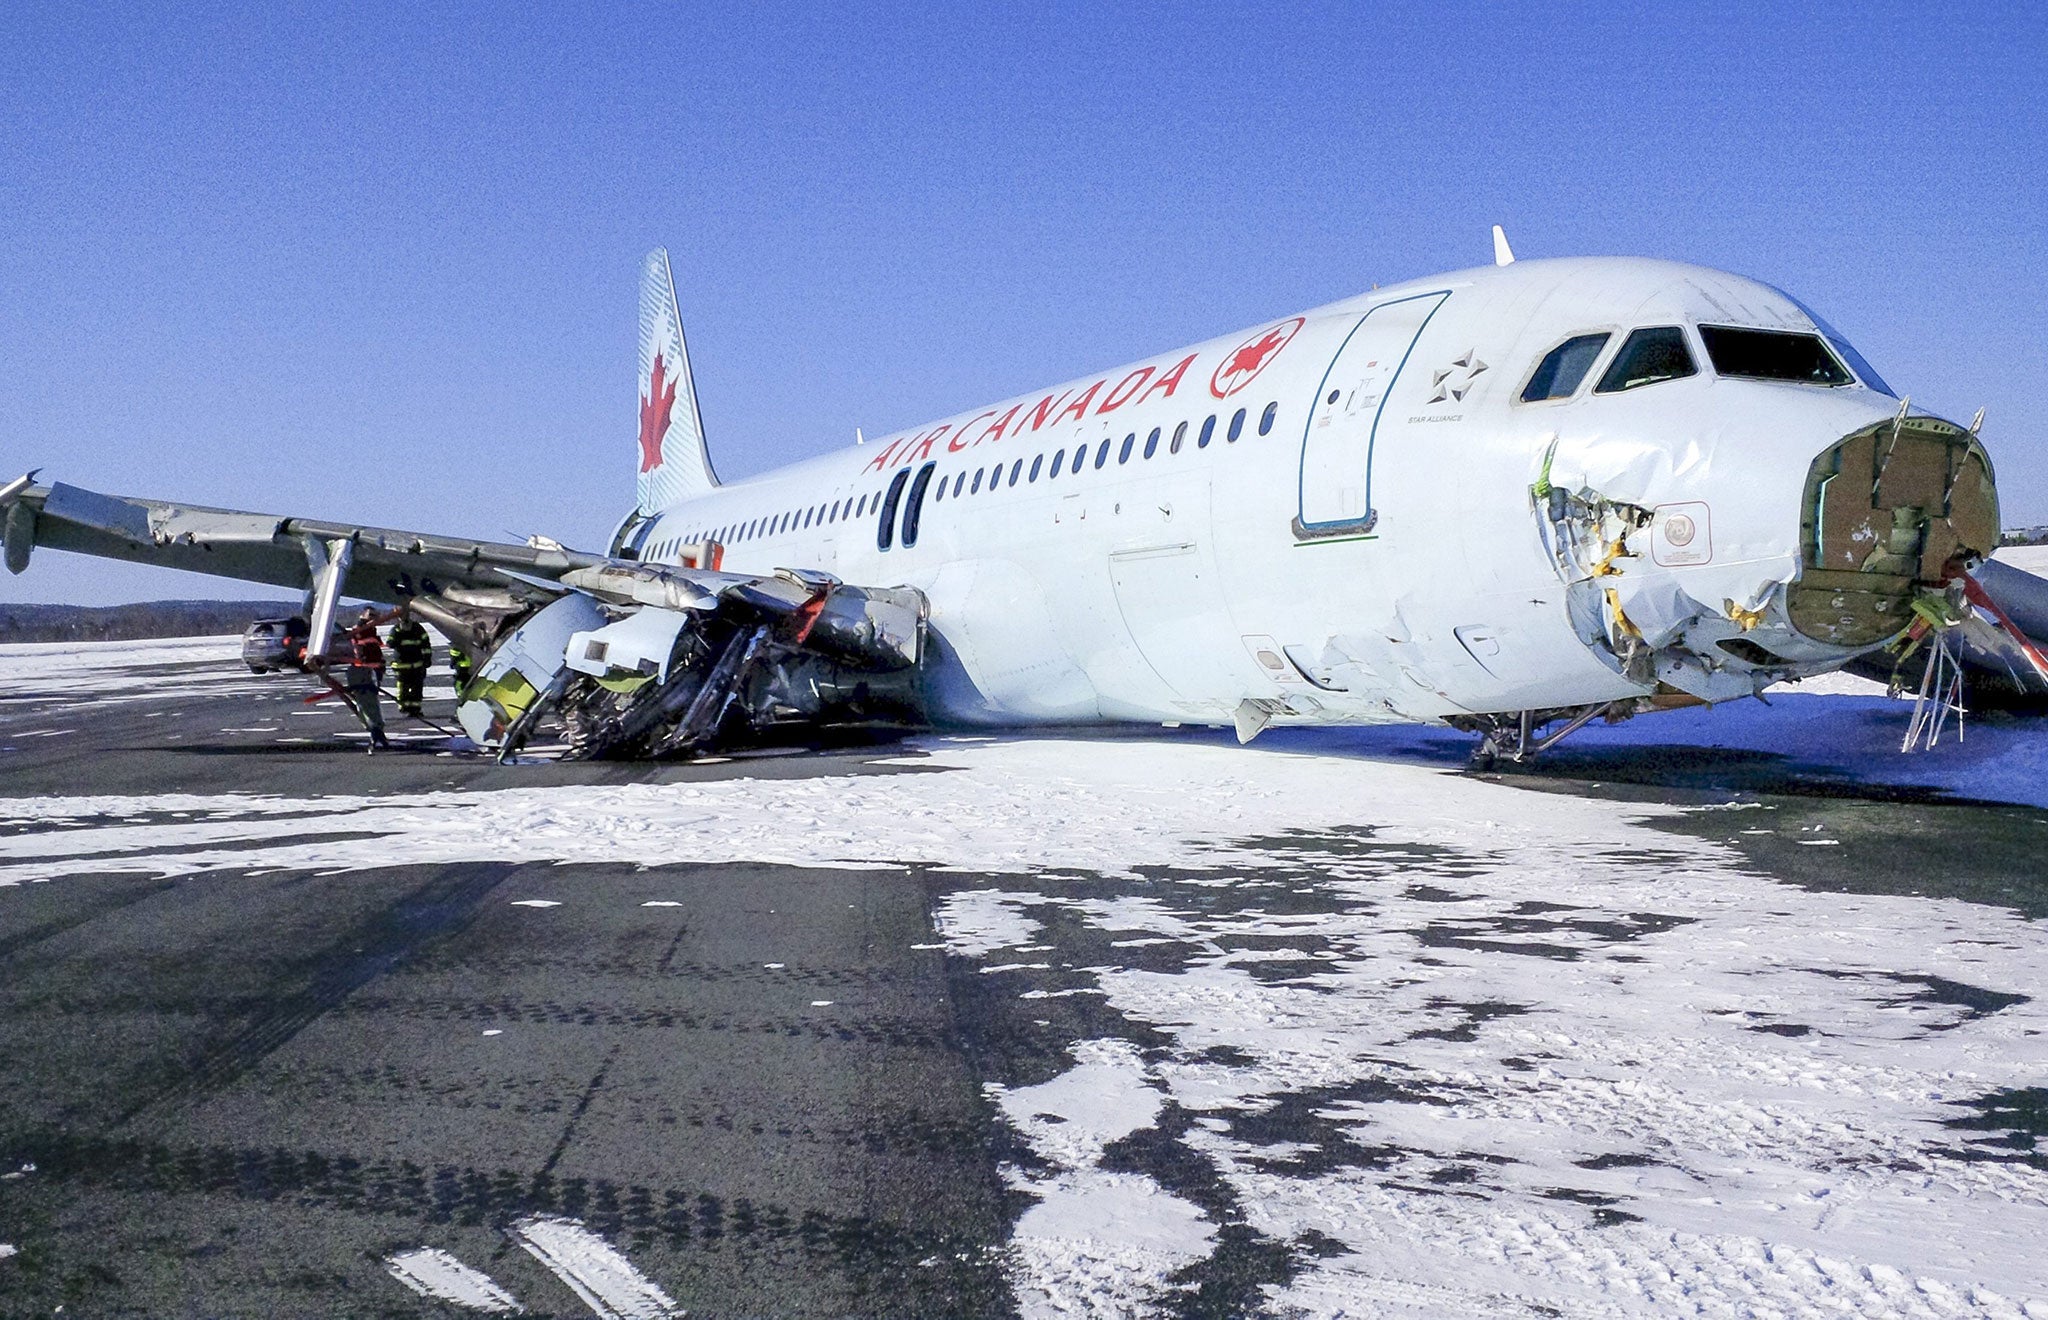 The Air Canada Airbus A320 which slid off the runway following a hard landing in poor weather conditions in Halifax, Nova Scotia